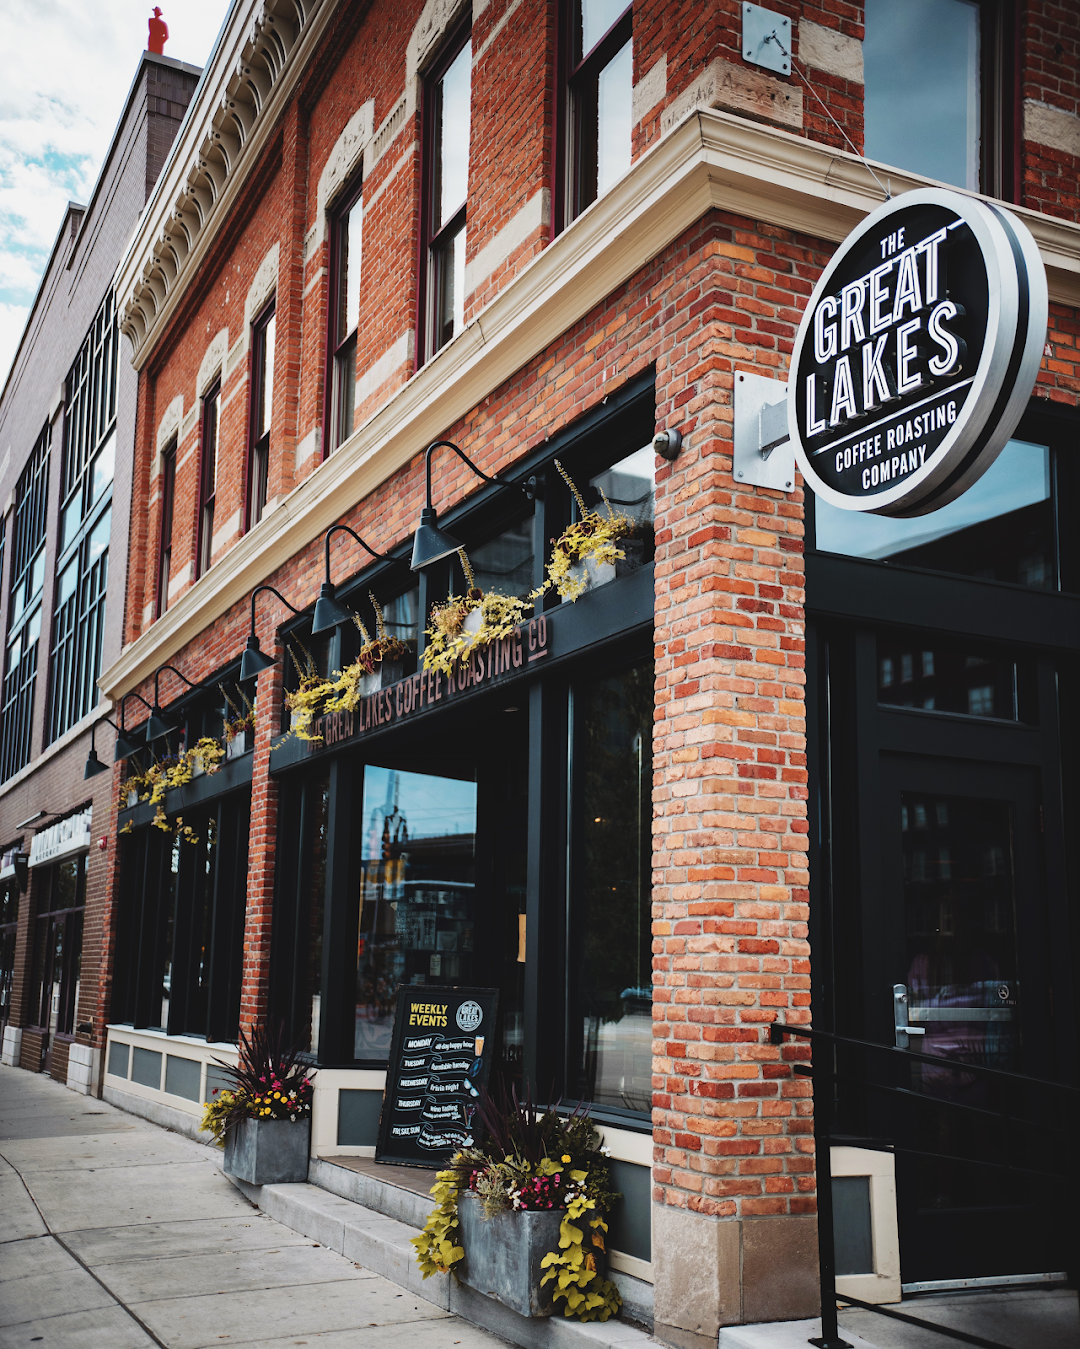 The Great Lakes Coffee Roasting Company